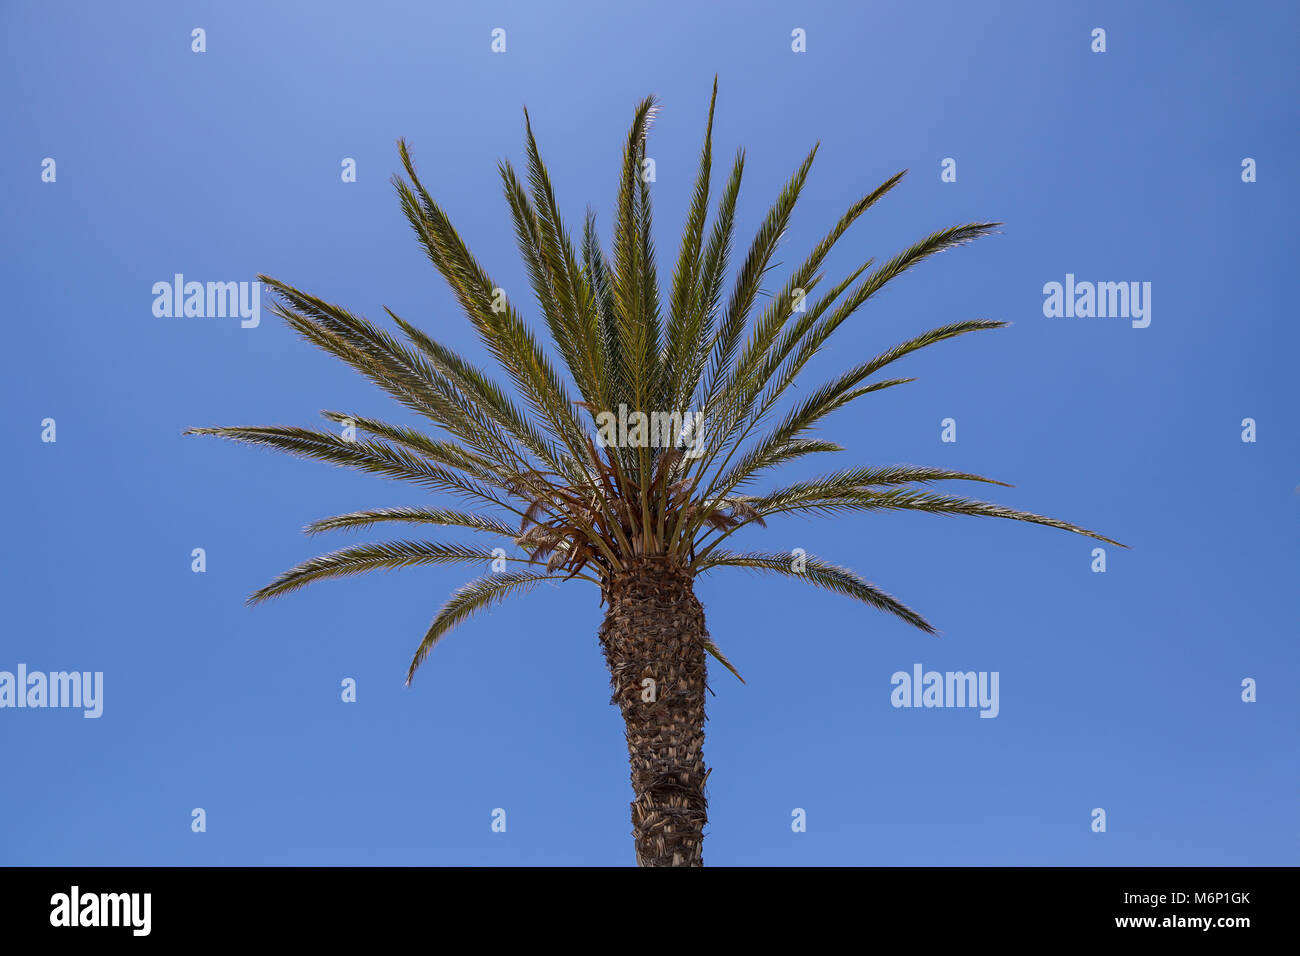 Coconut Palm tree on the sky at background Stock Photo